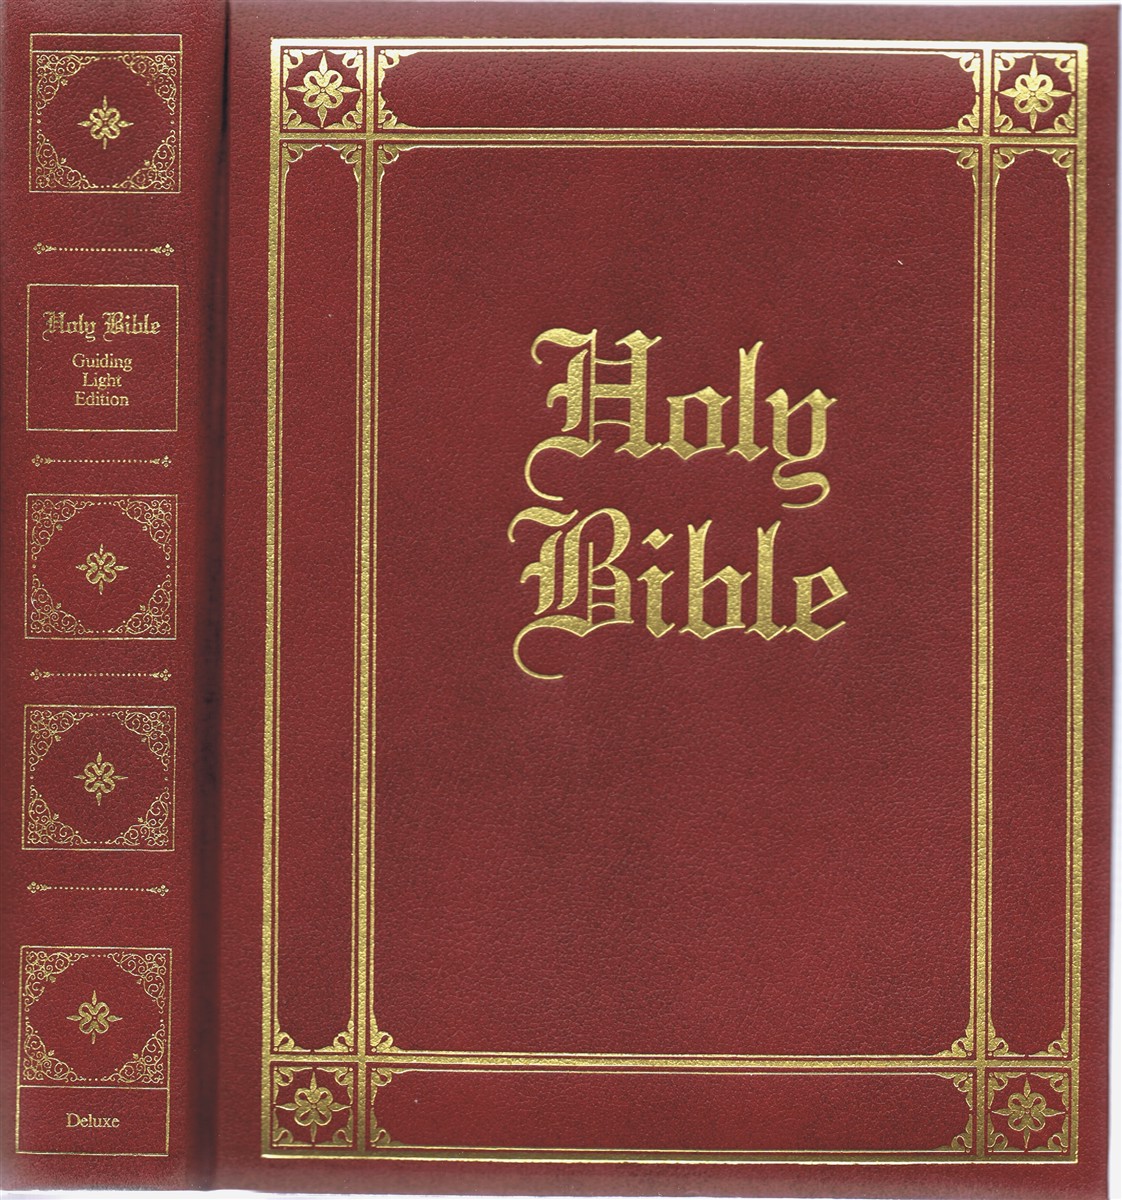 BIBLE - The Holy Bible, Containing the Old and New Testaments in the Authorized King James Version